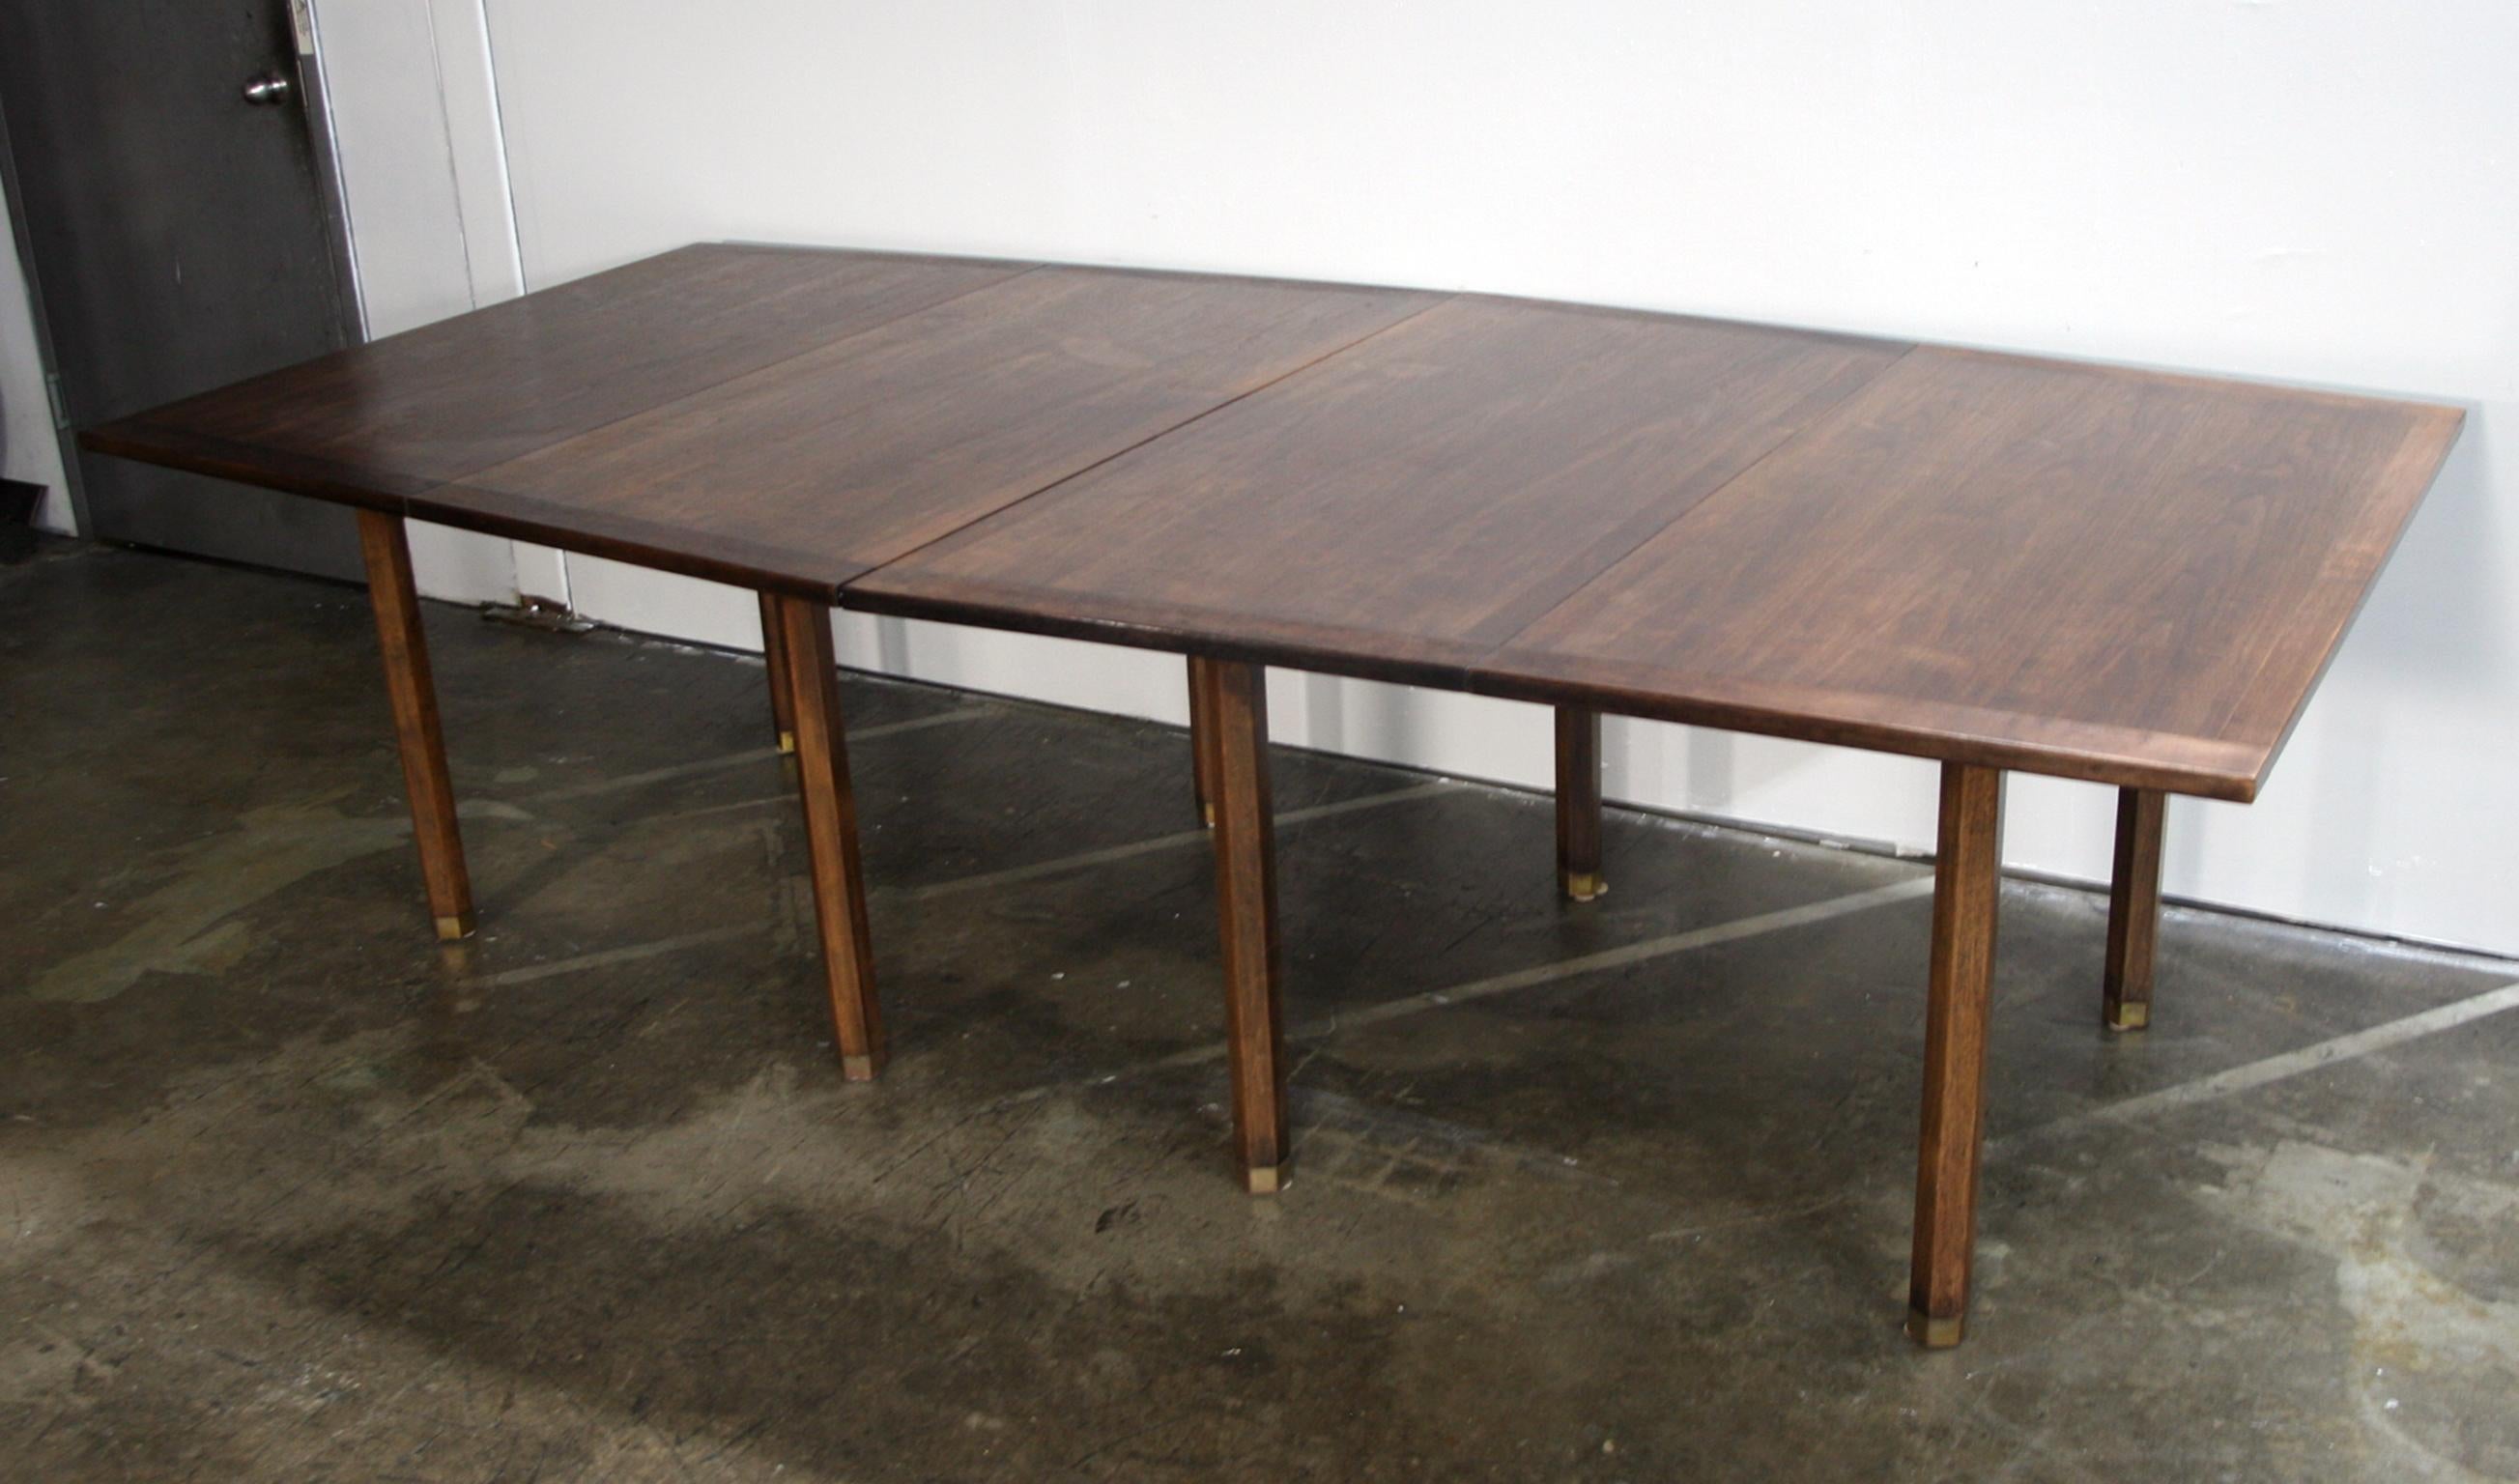 Midcentury Dunbar conference dining table walnut 8’ long. This is a rare custom ordered beautiful hexagonal Dunbar conference dining table by Edward Wormley circa 1960 with 8 solid walnut hexagon legs and brass caps. All solid walnut - newly